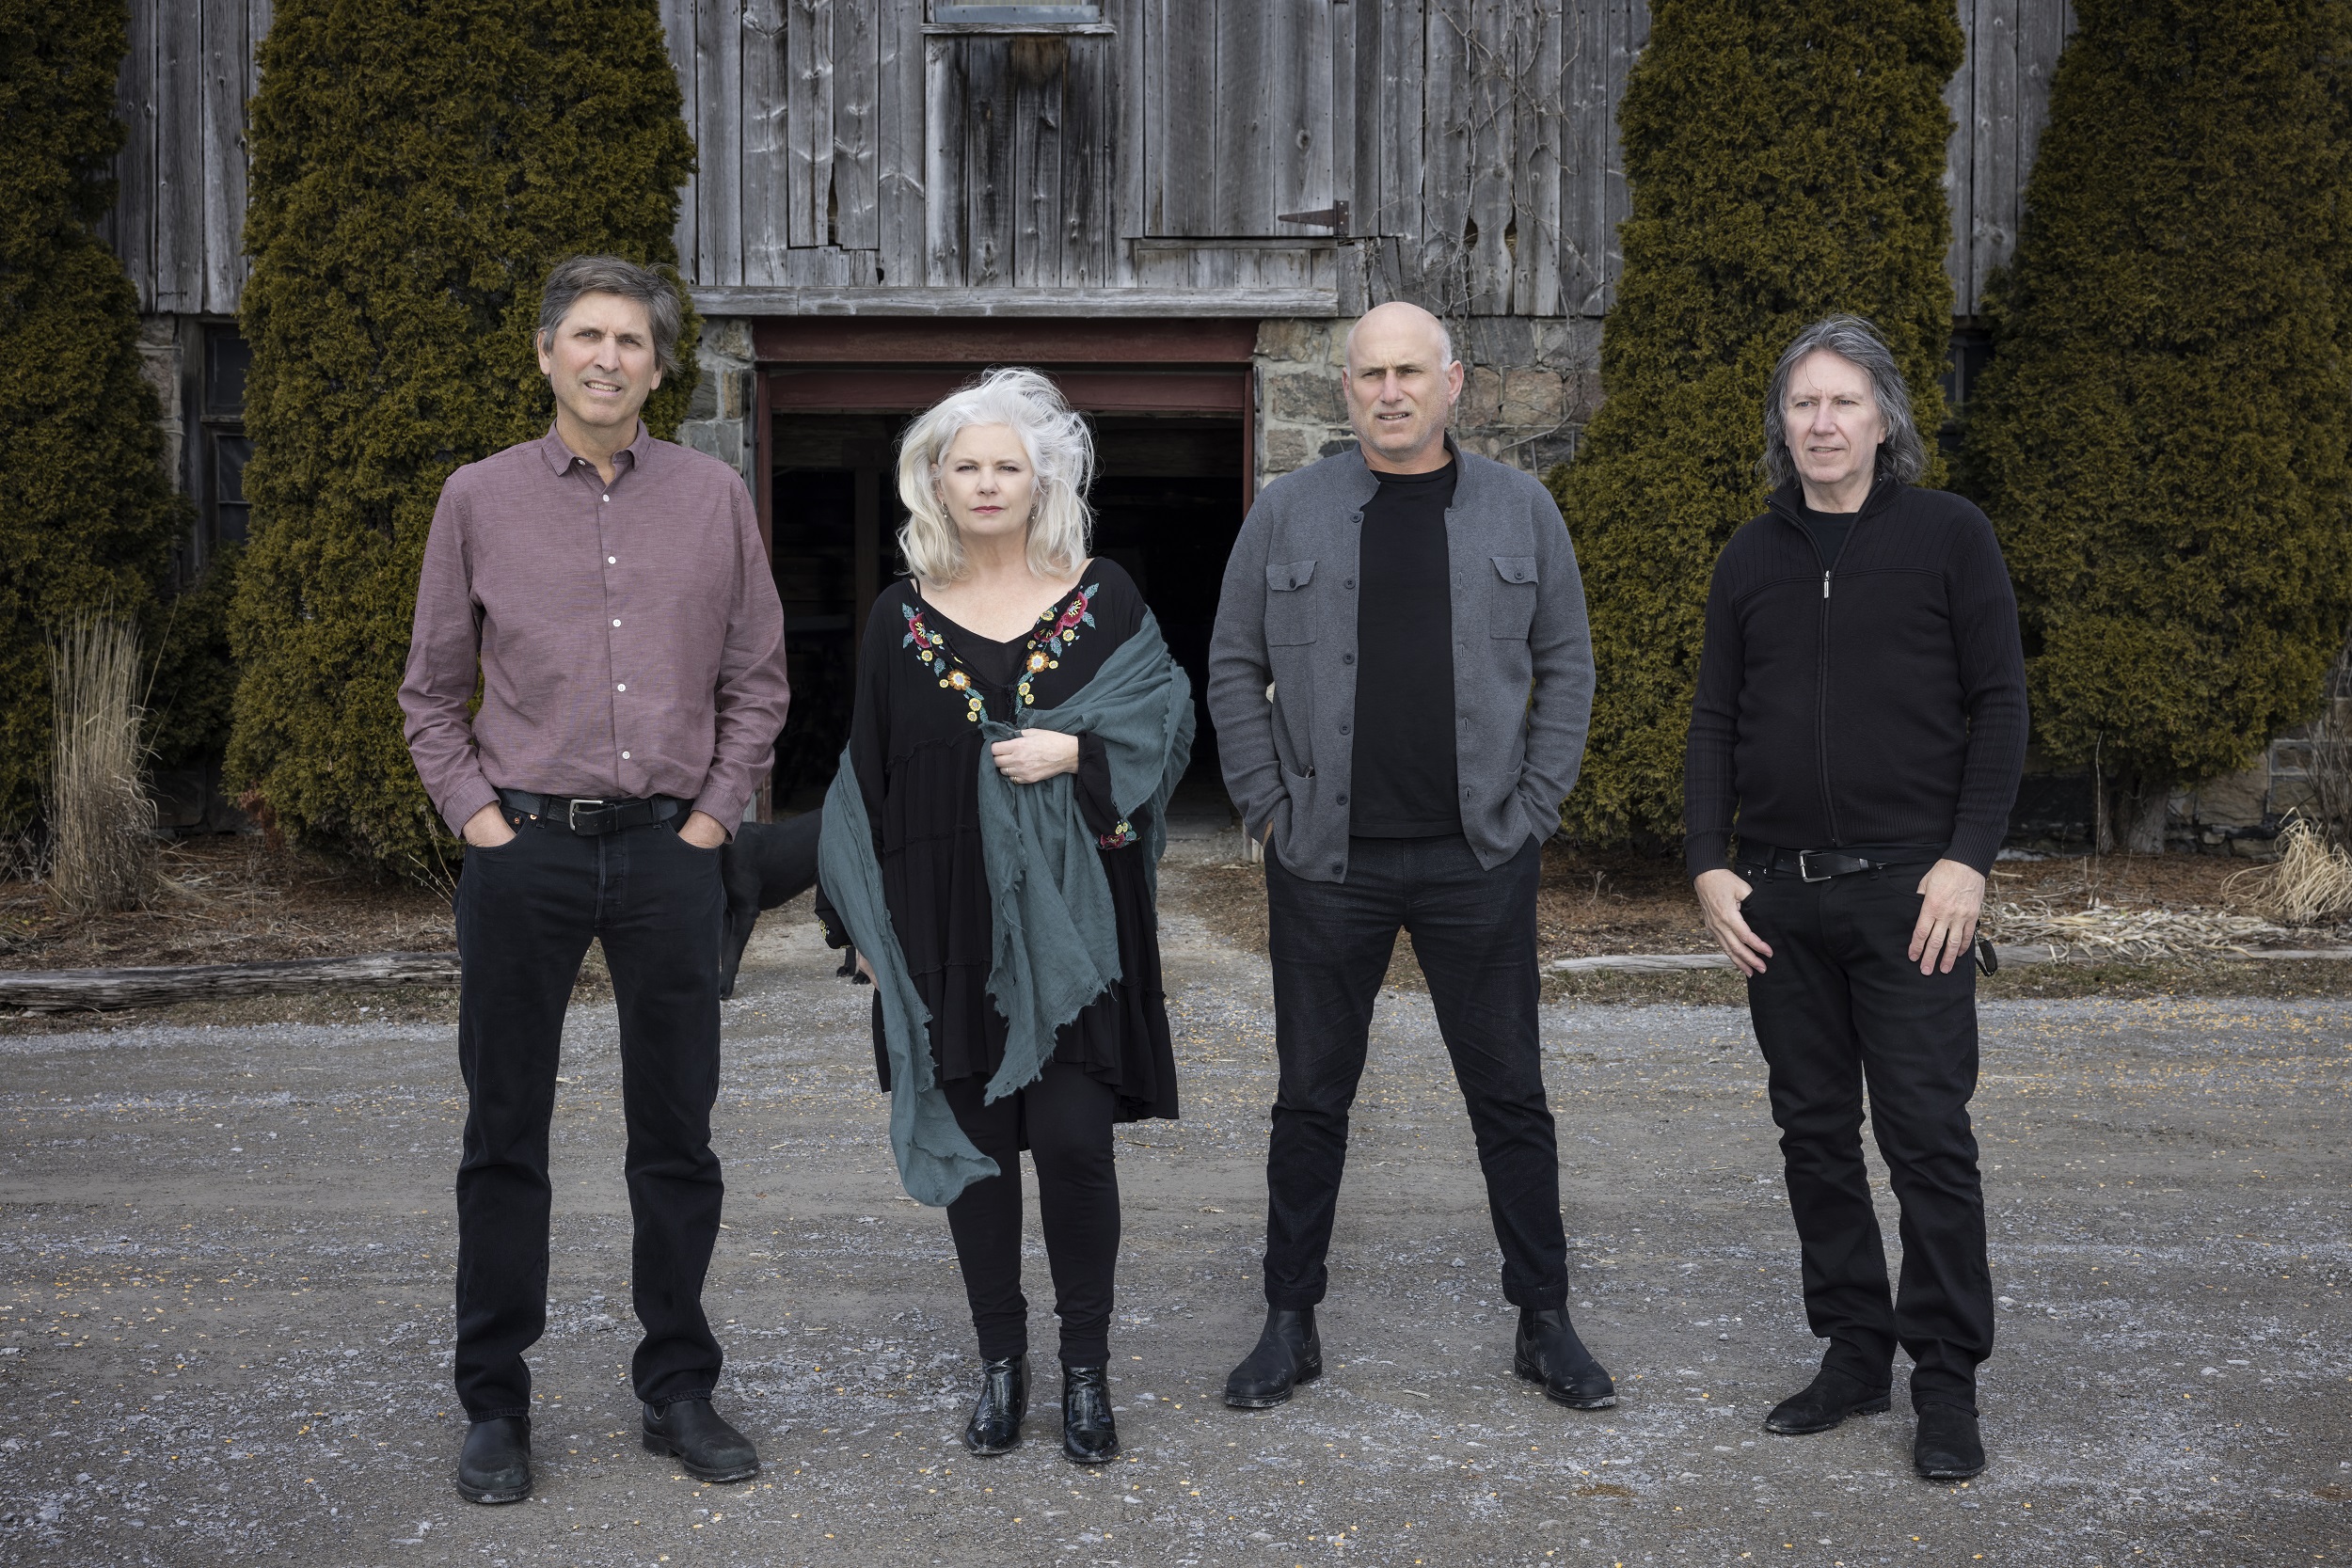 The Cowboy Junkies release "What I Lost" from their album